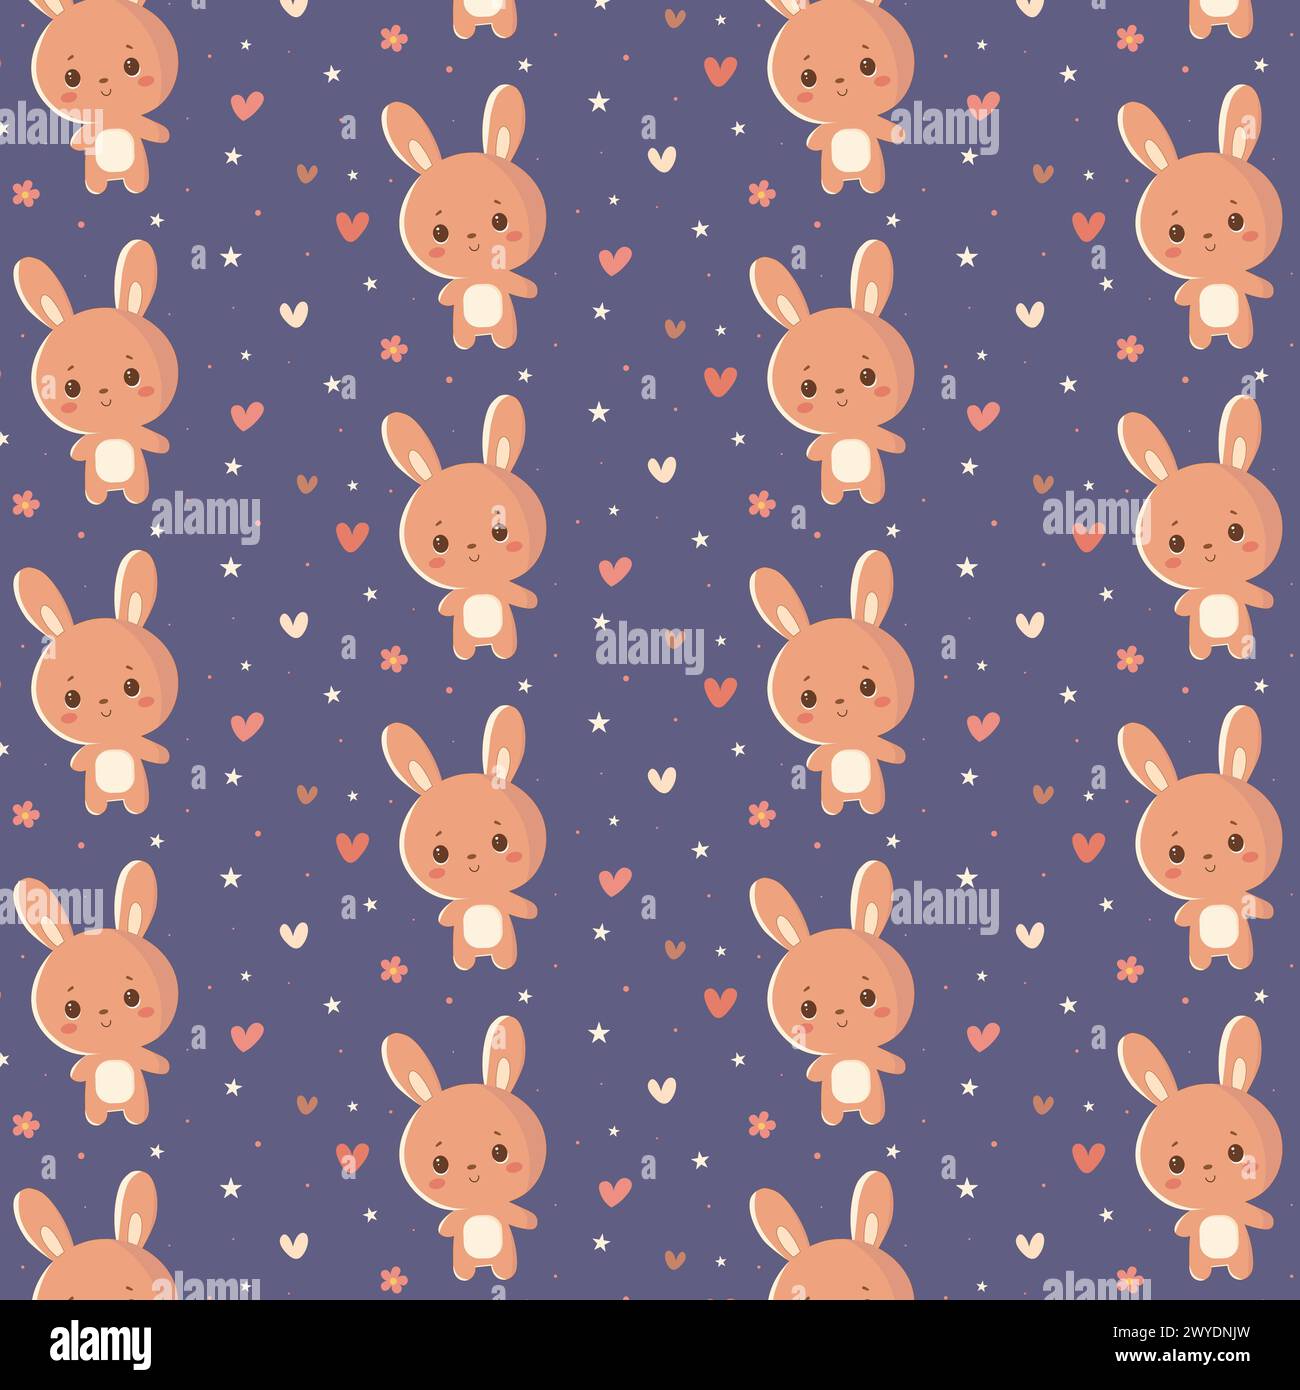 Flat design kawaii pattern featuring a cartoon hare surrounded by hearts and stars, perfect for printing on textiles. Stock Vector